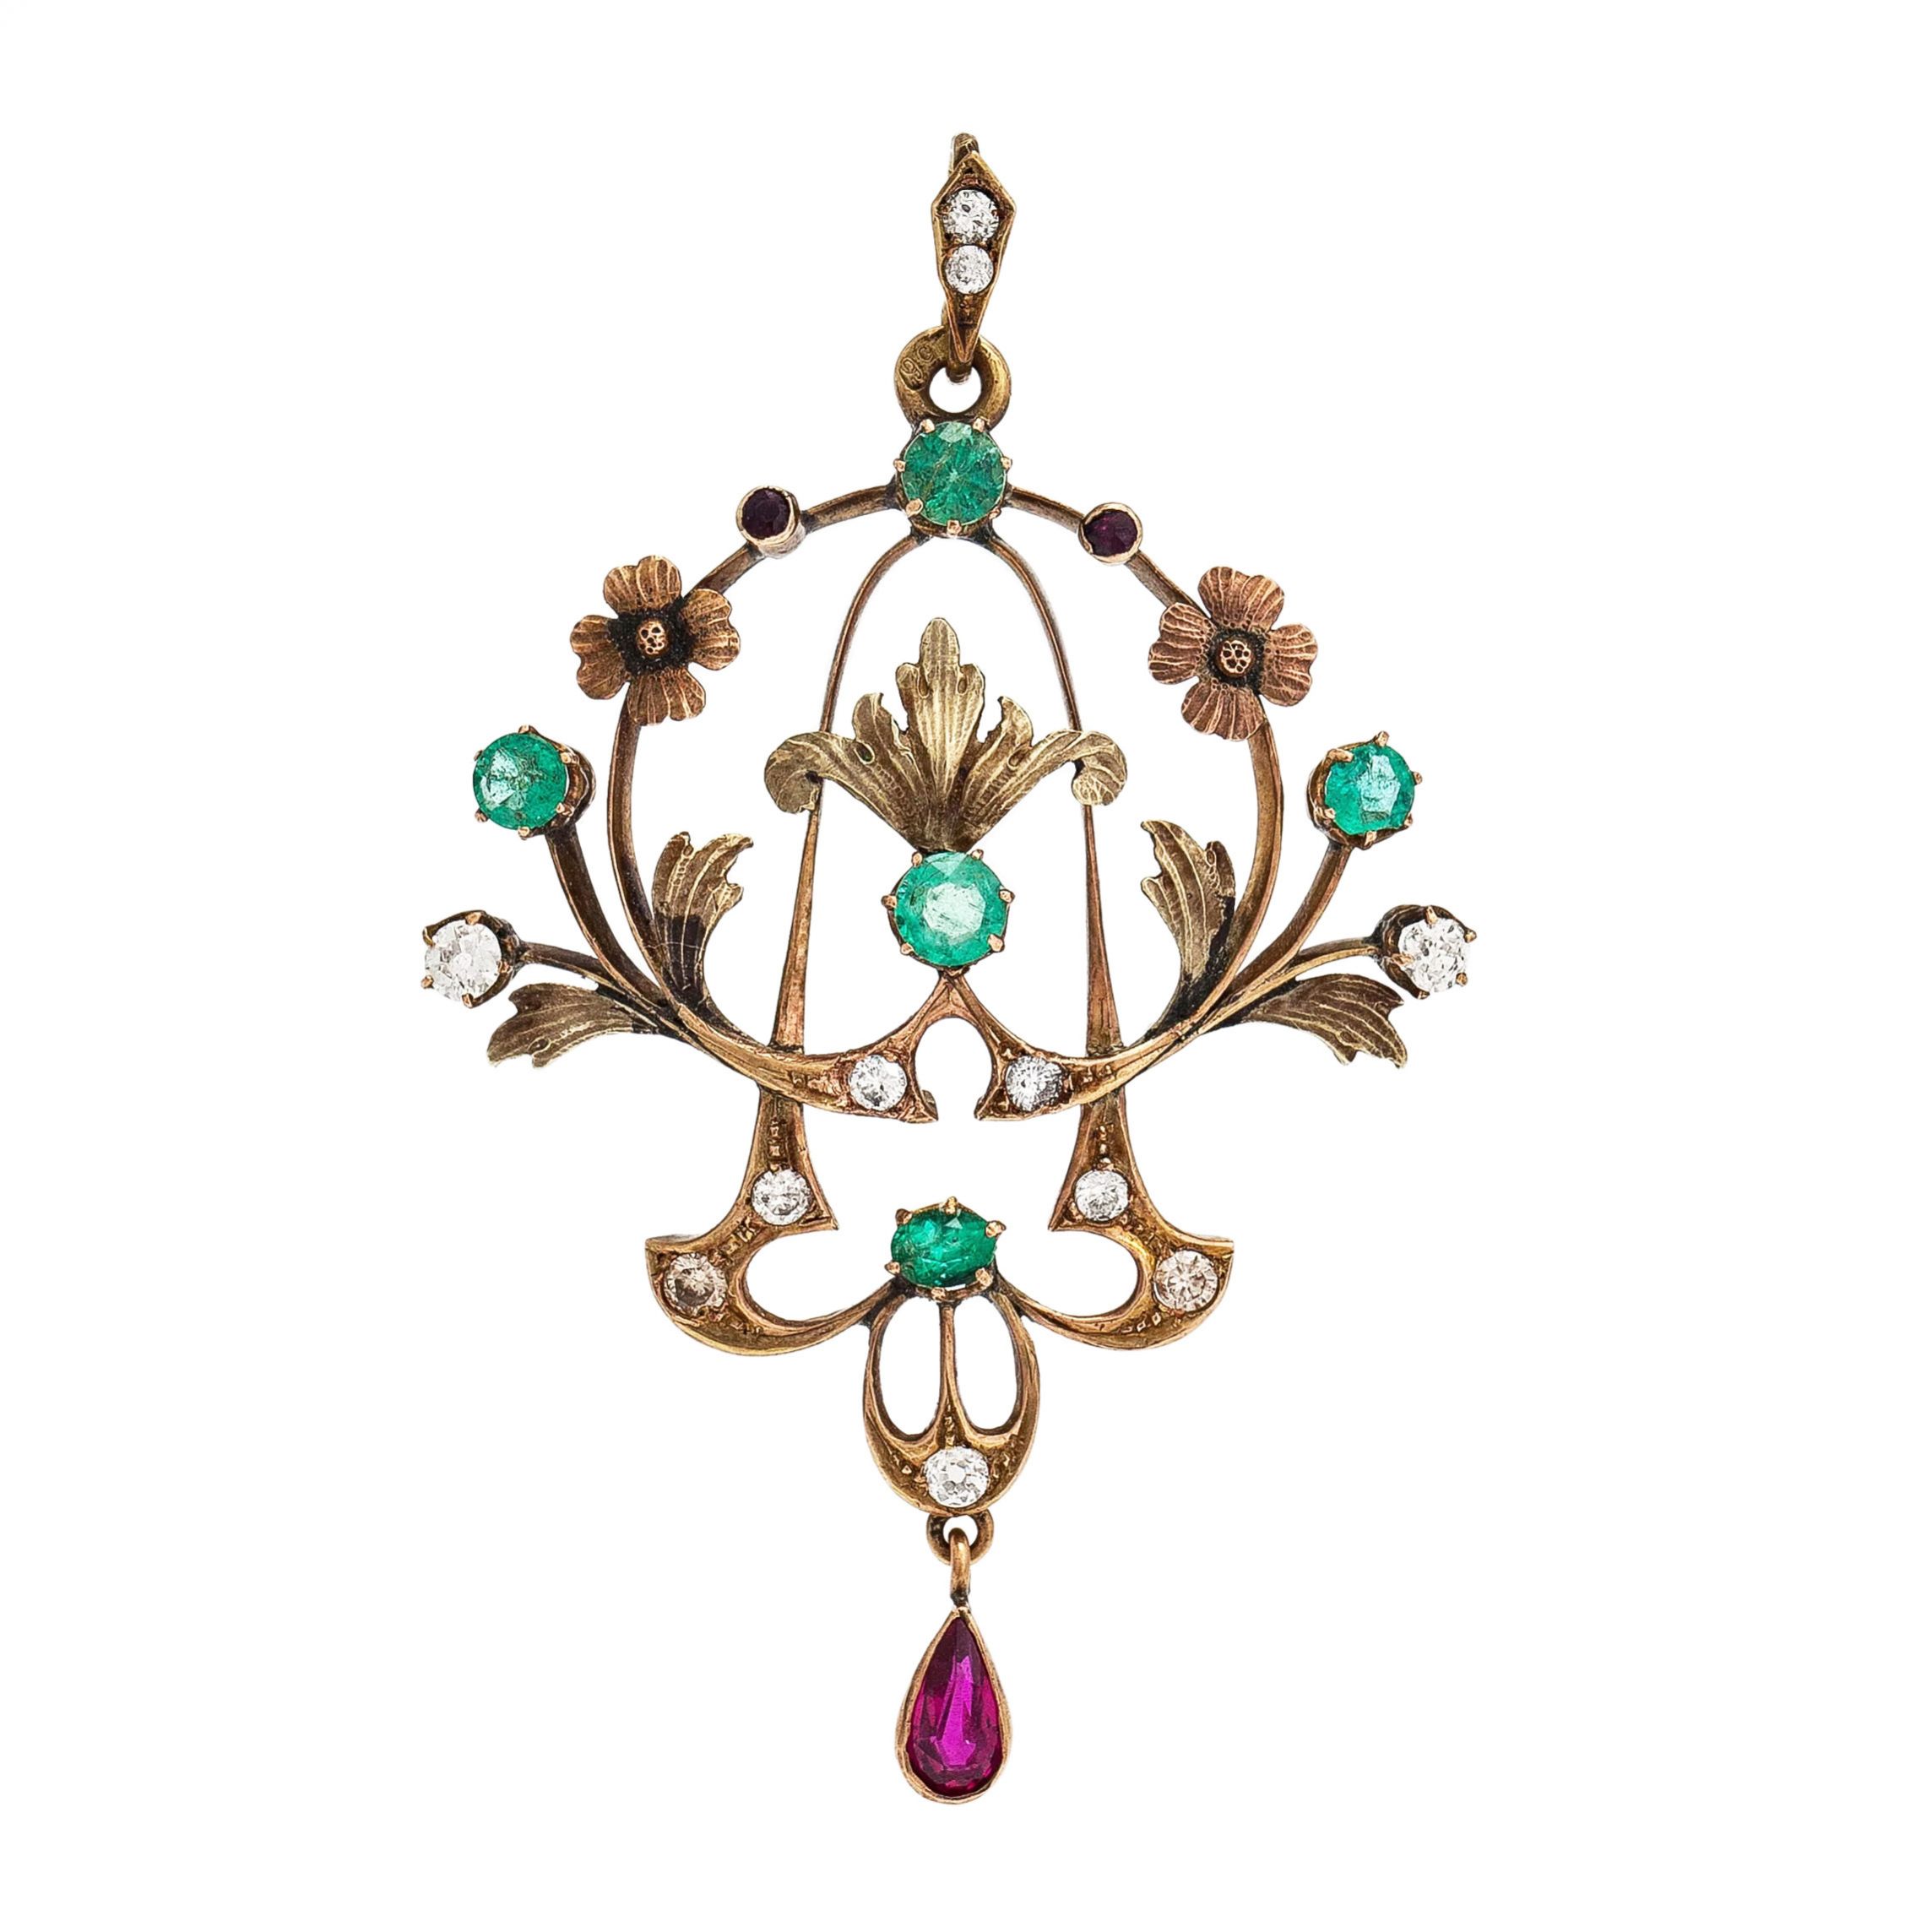 Pendant-in-14K-gold-with-emeralds-rubies-and-diamonds-in-Art-Nouveau-style-Russia-1900s-